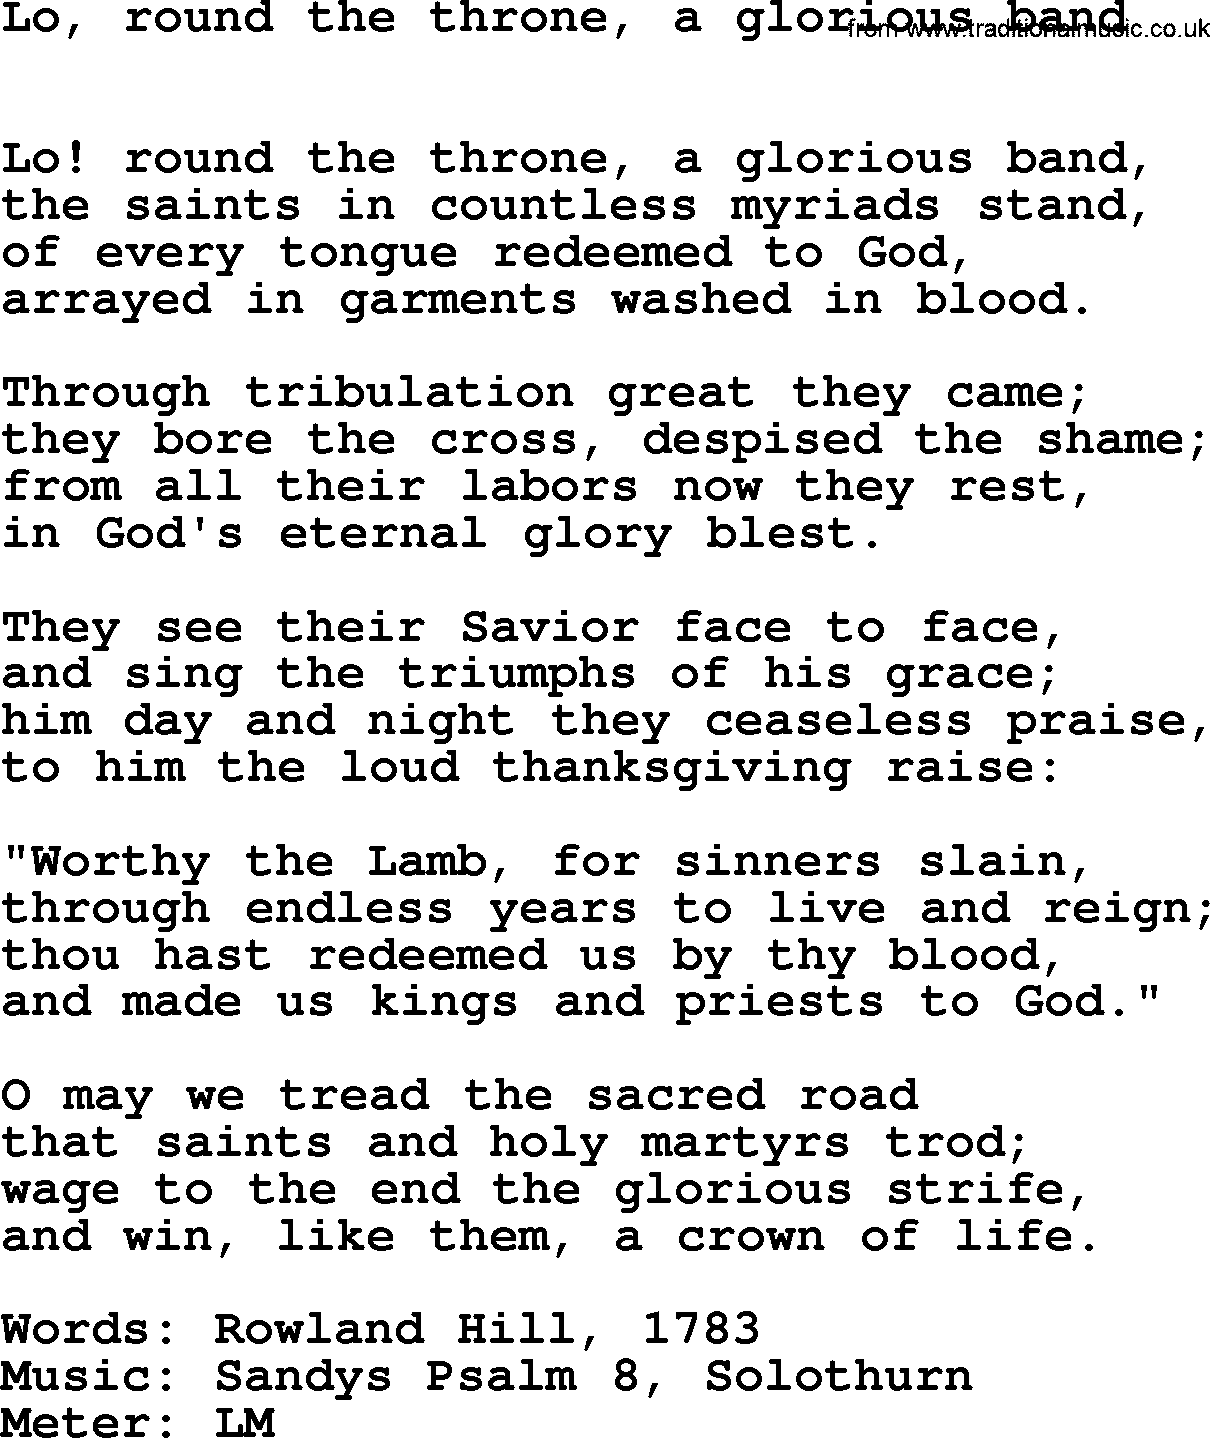 Book of Common Praise Hymn: Lo, Round The Throne, A Glorious Band.txt lyrics with midi music